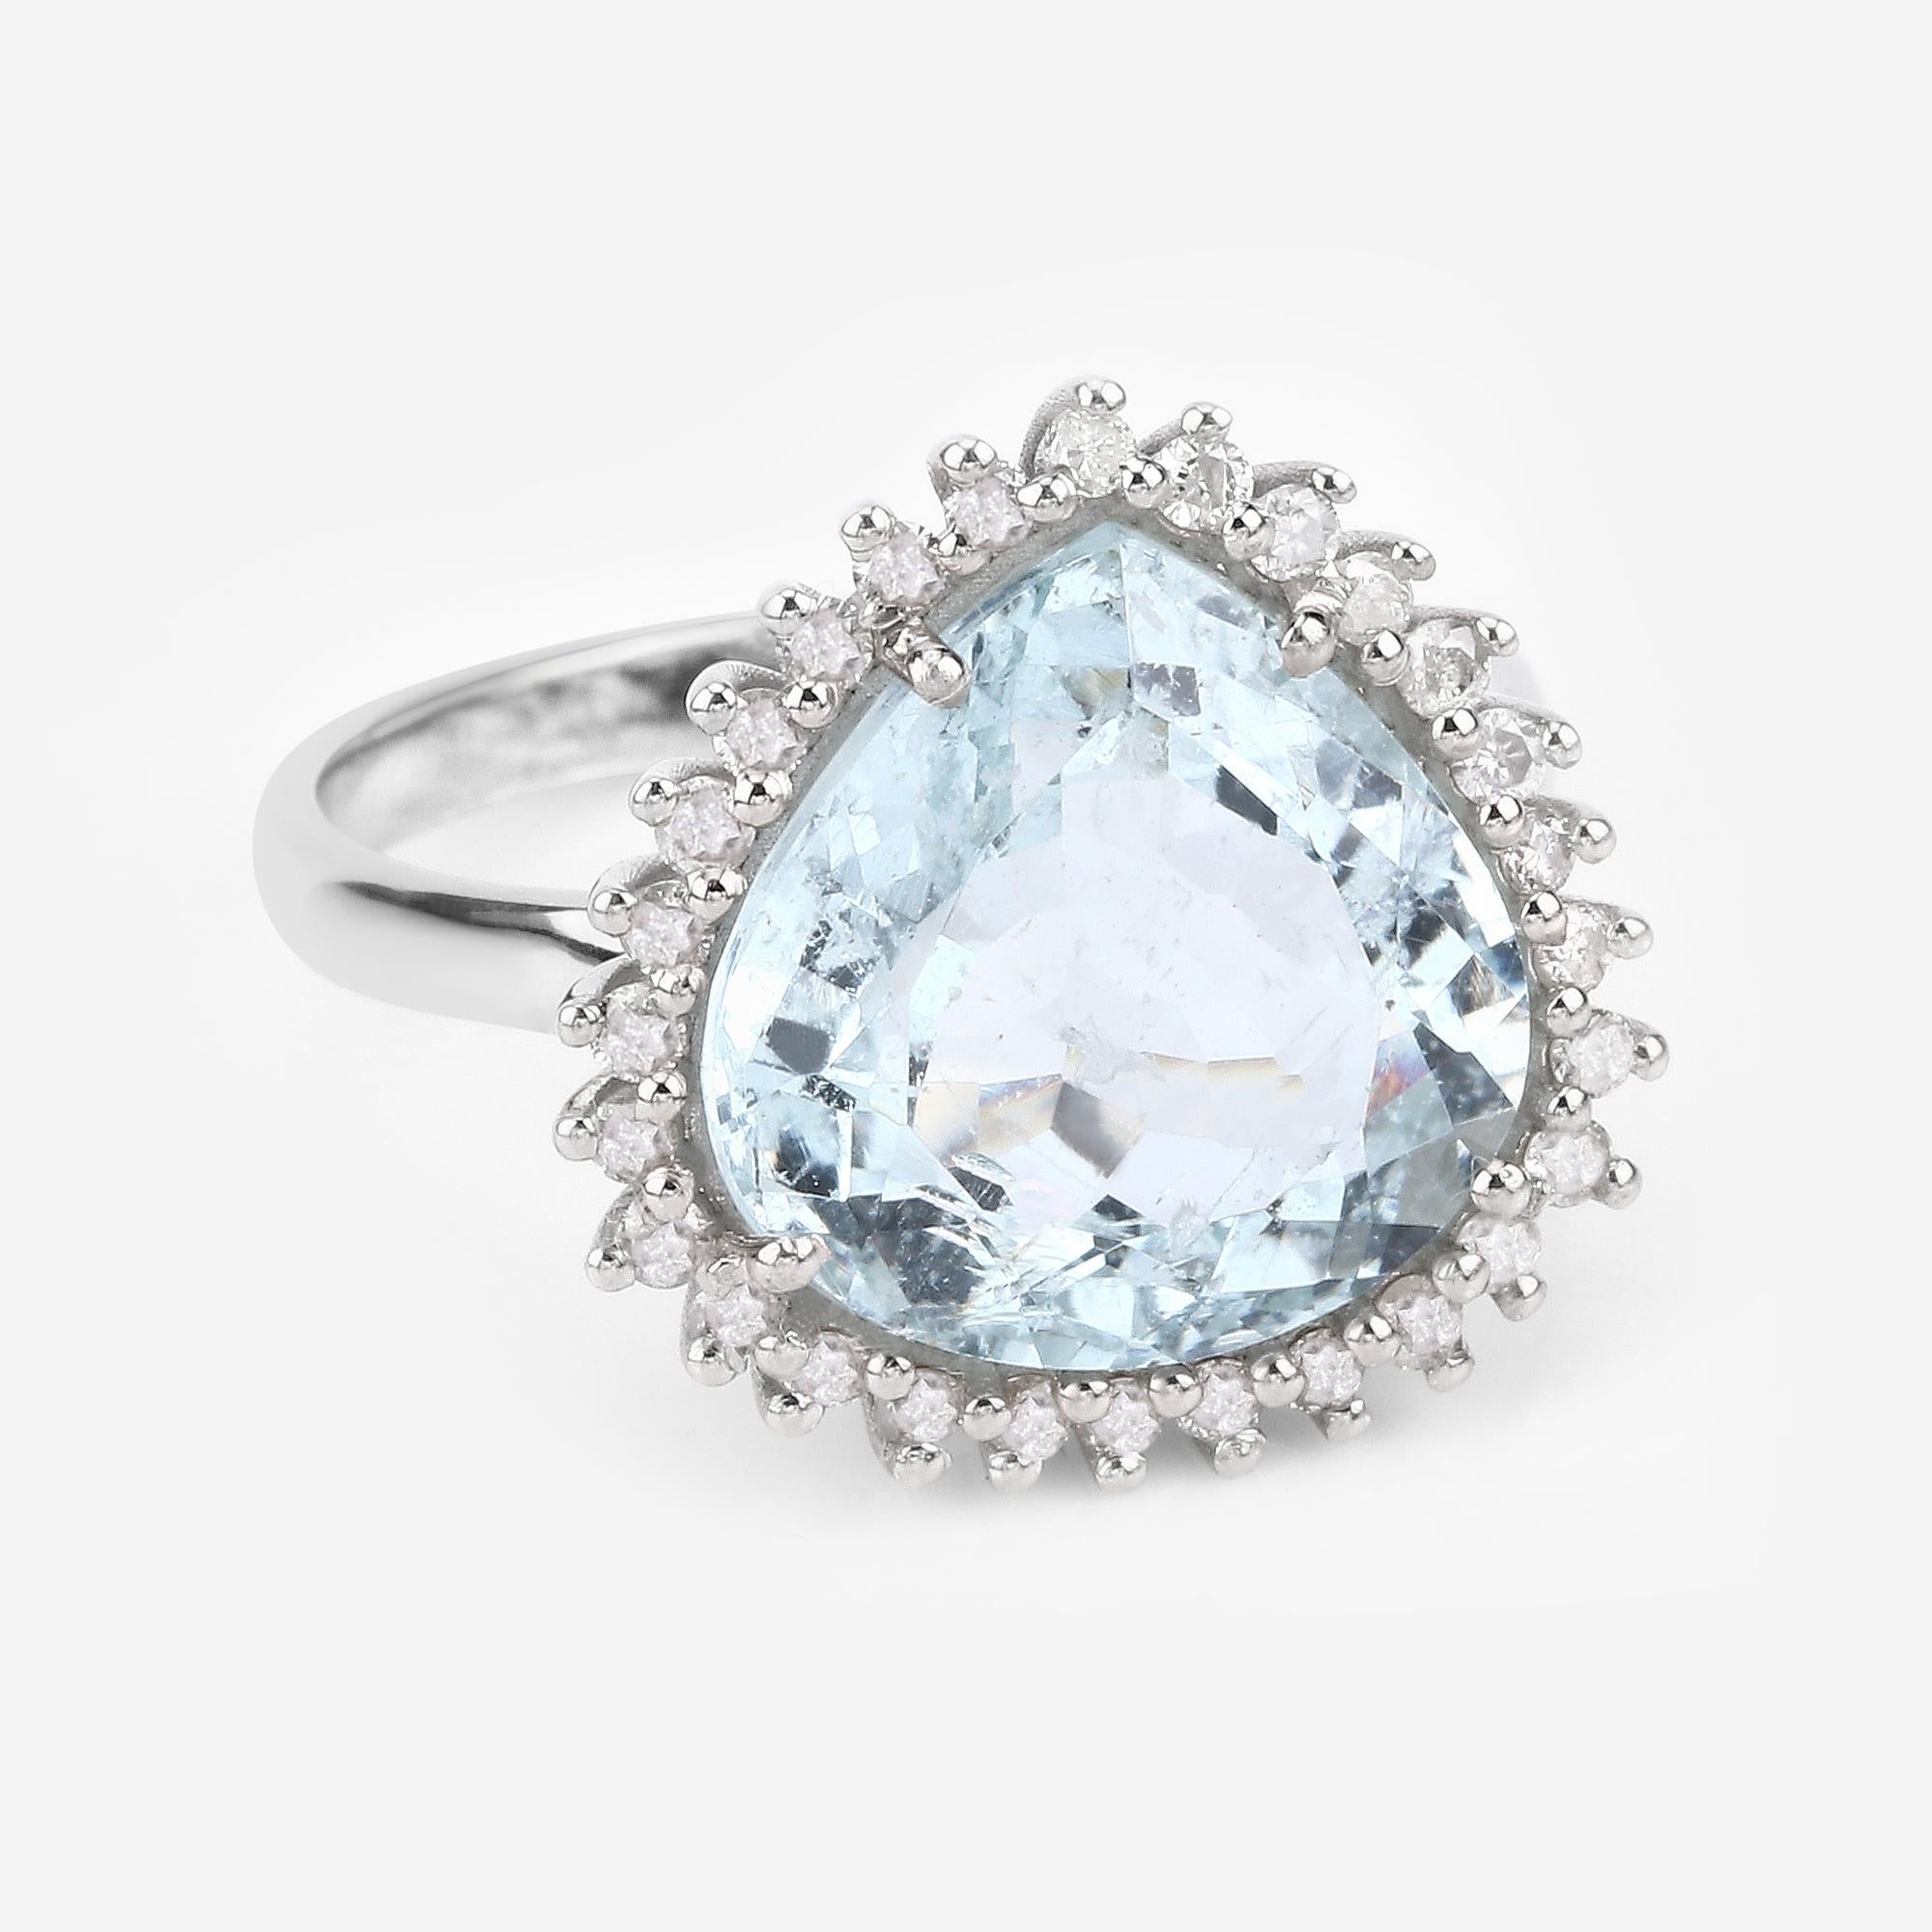 6.40cttw Aquamarine with Diamonds 0.45cttw Halo Sterling Silver Ring 1